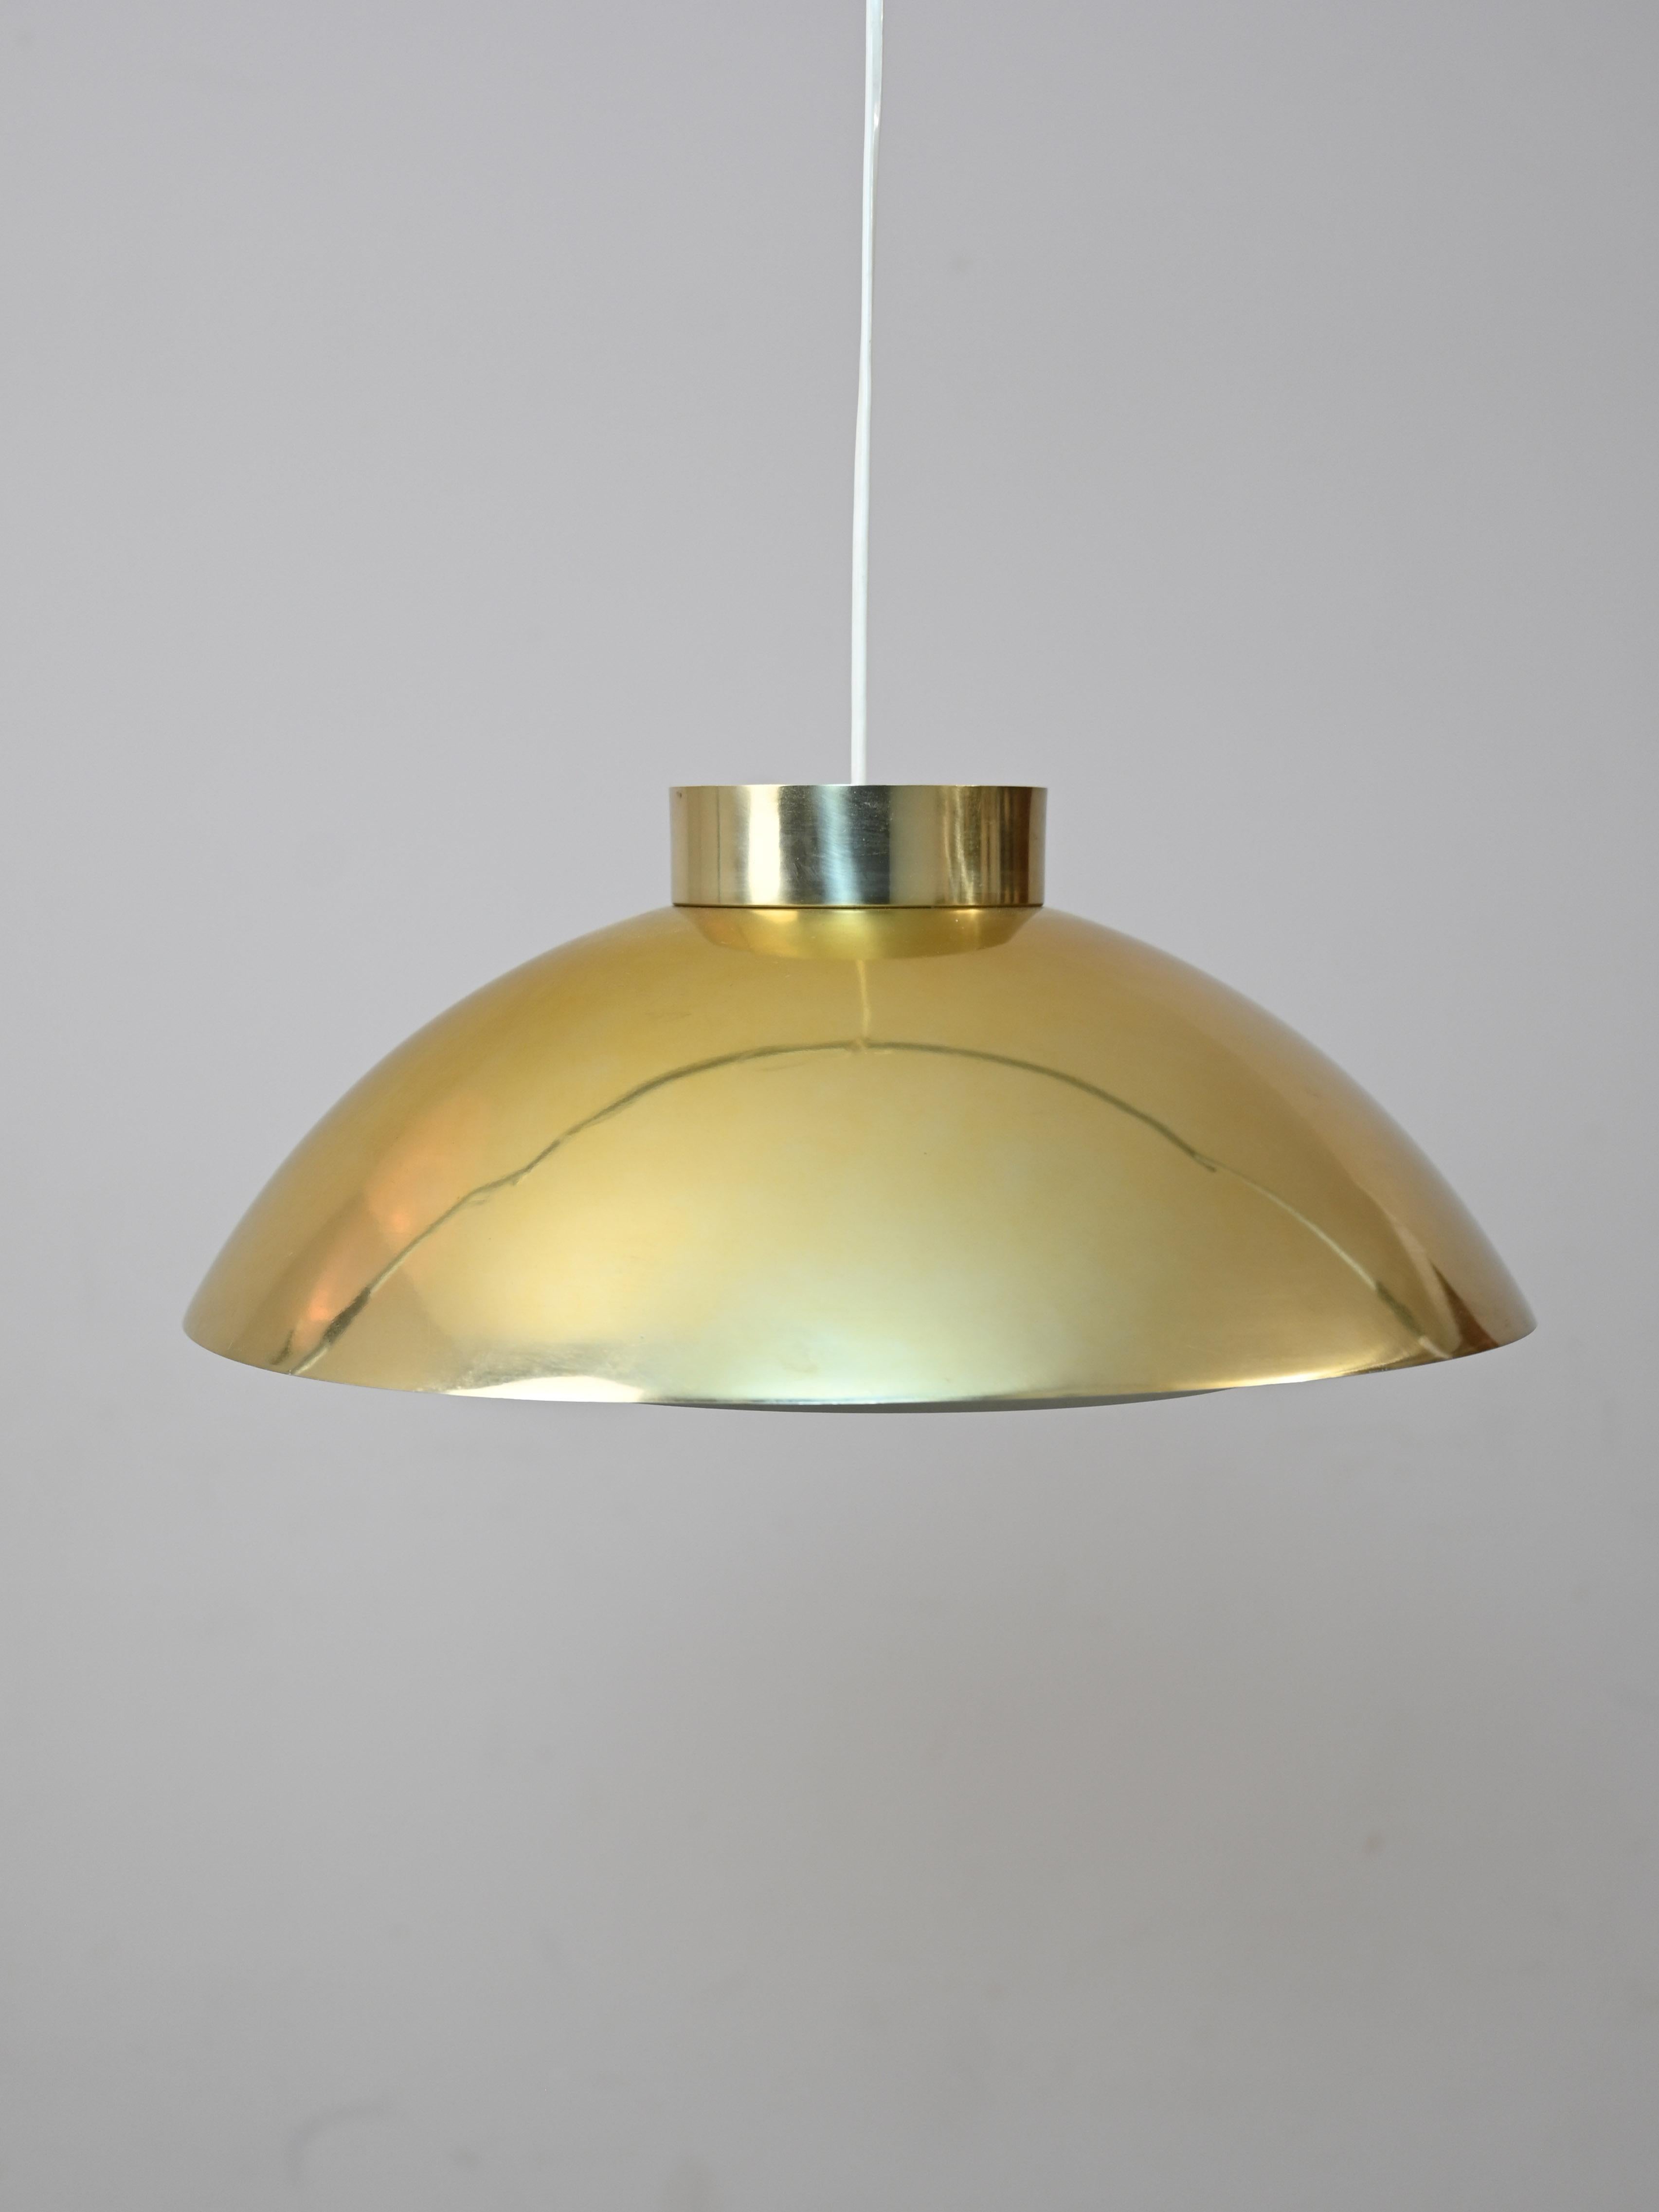 Vintage lamp with sheet metal shade.

This Scandinavian furniture piece features a simple and elegant design that also fits well with contemporary style.
Ideal as a dining room lamp to make the room original and unique.

Good condition. The